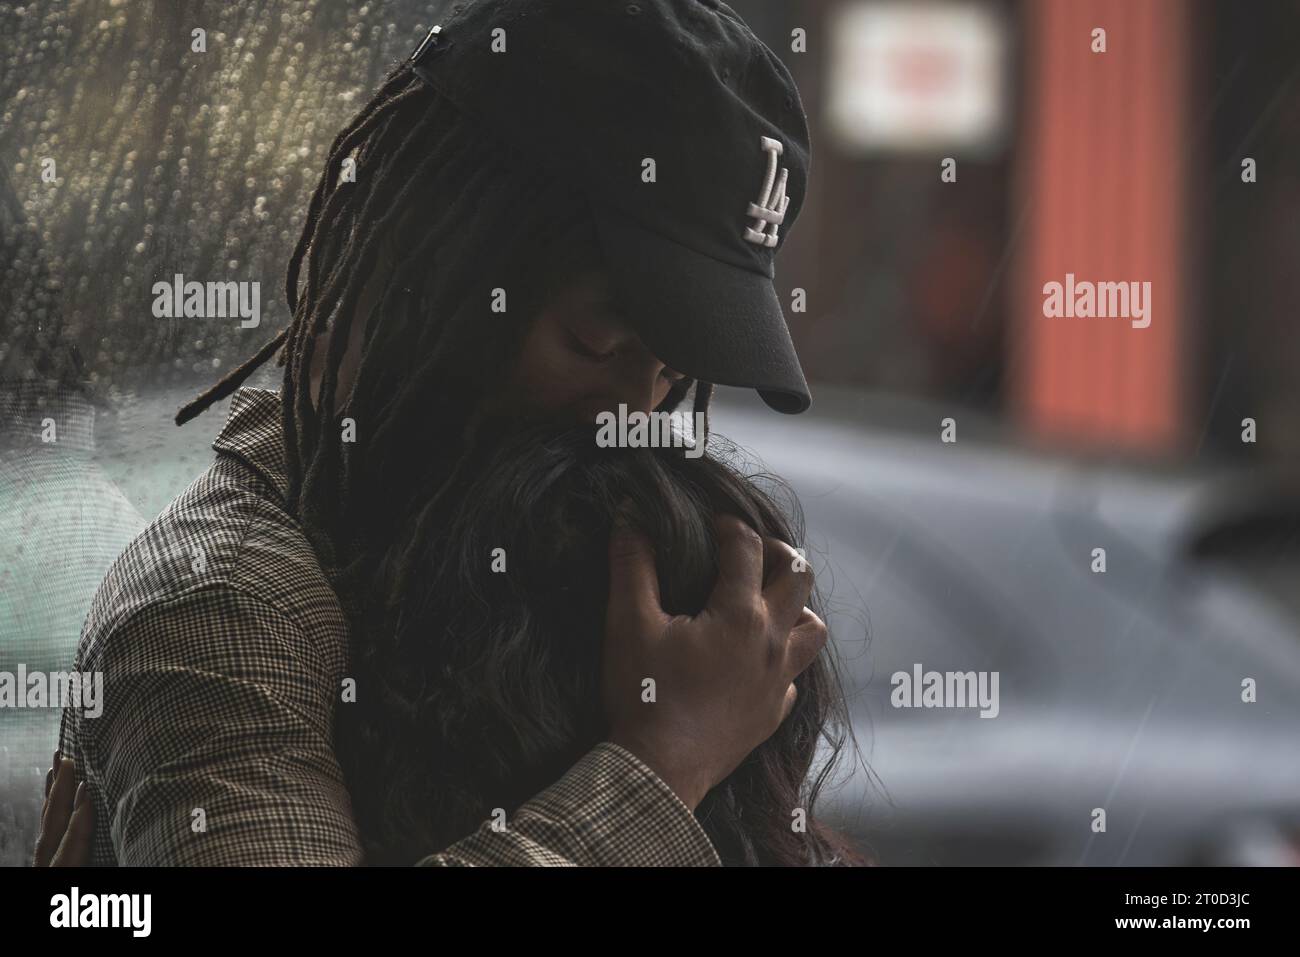 Couple embracing while waiting for rain Stock Photo